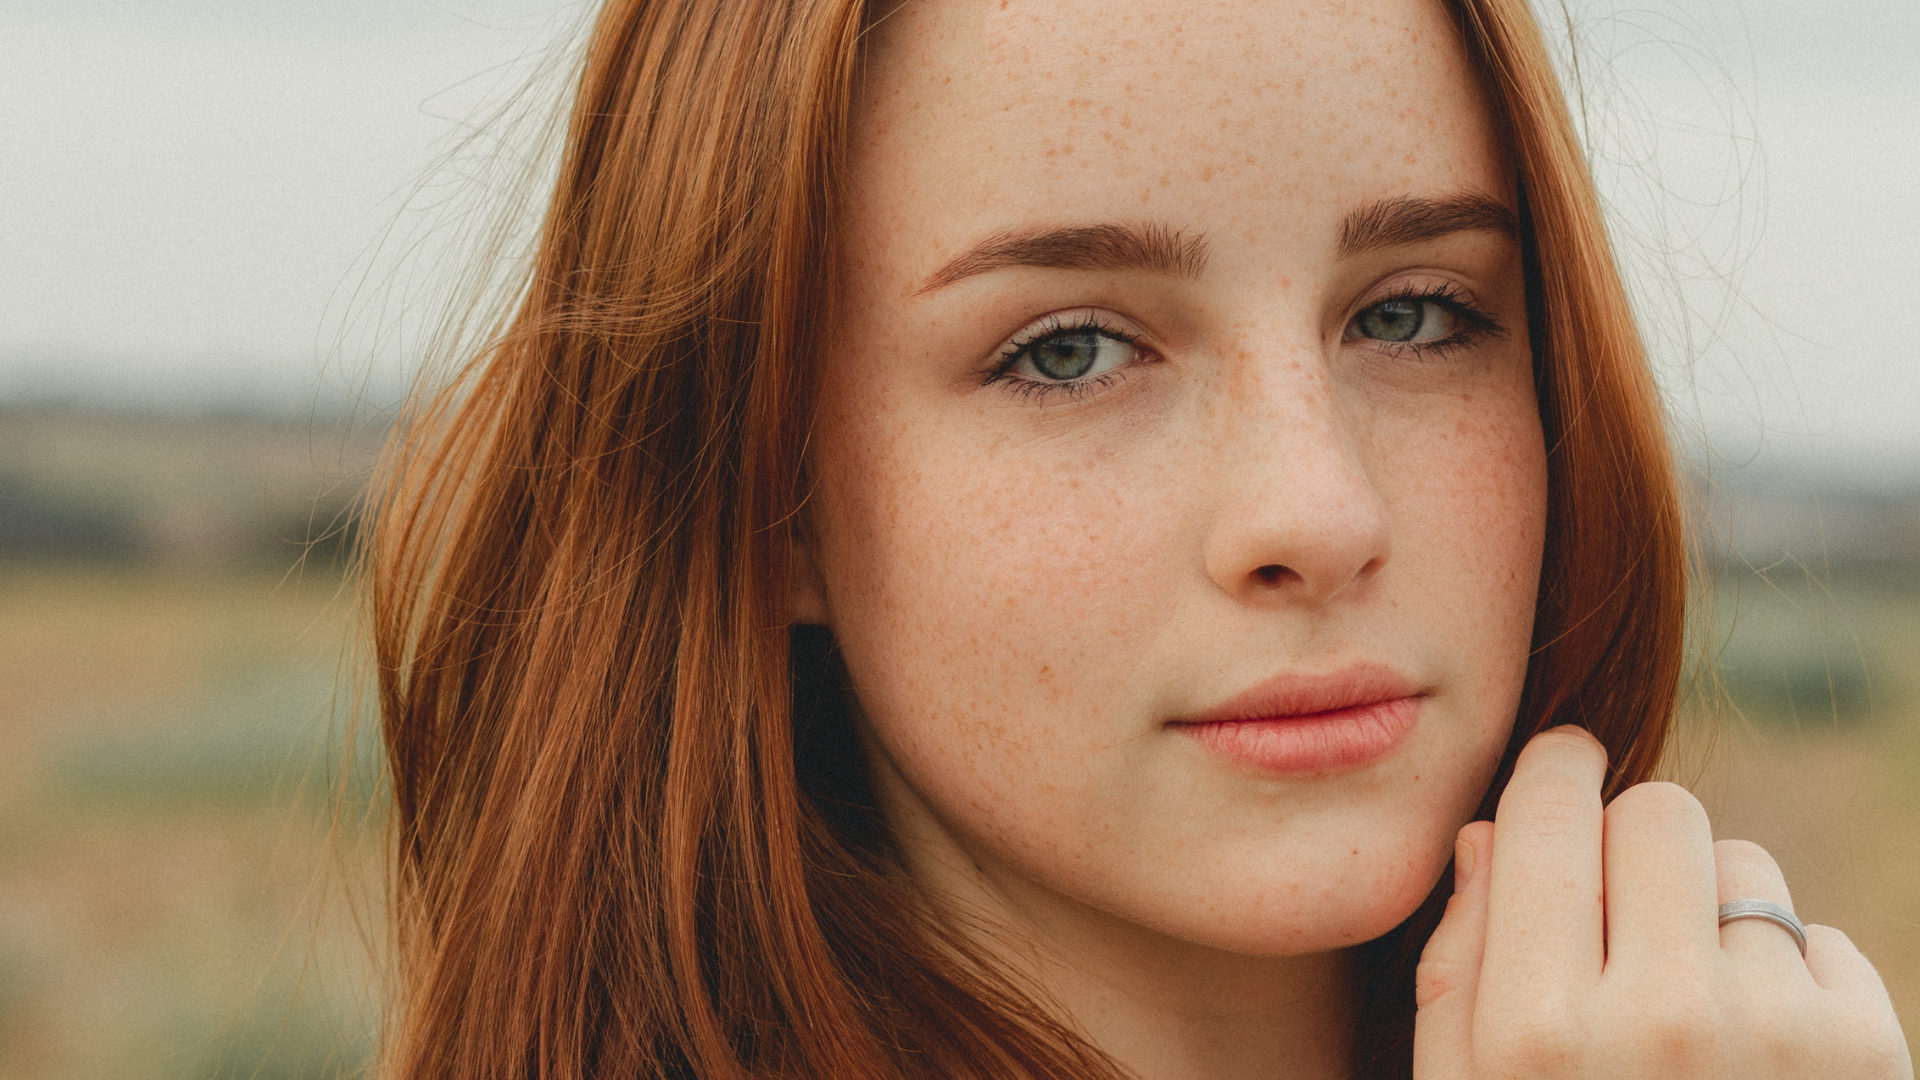 Raspberry Seed Oil as Natural SPF? Here’s The Truth, Redheads